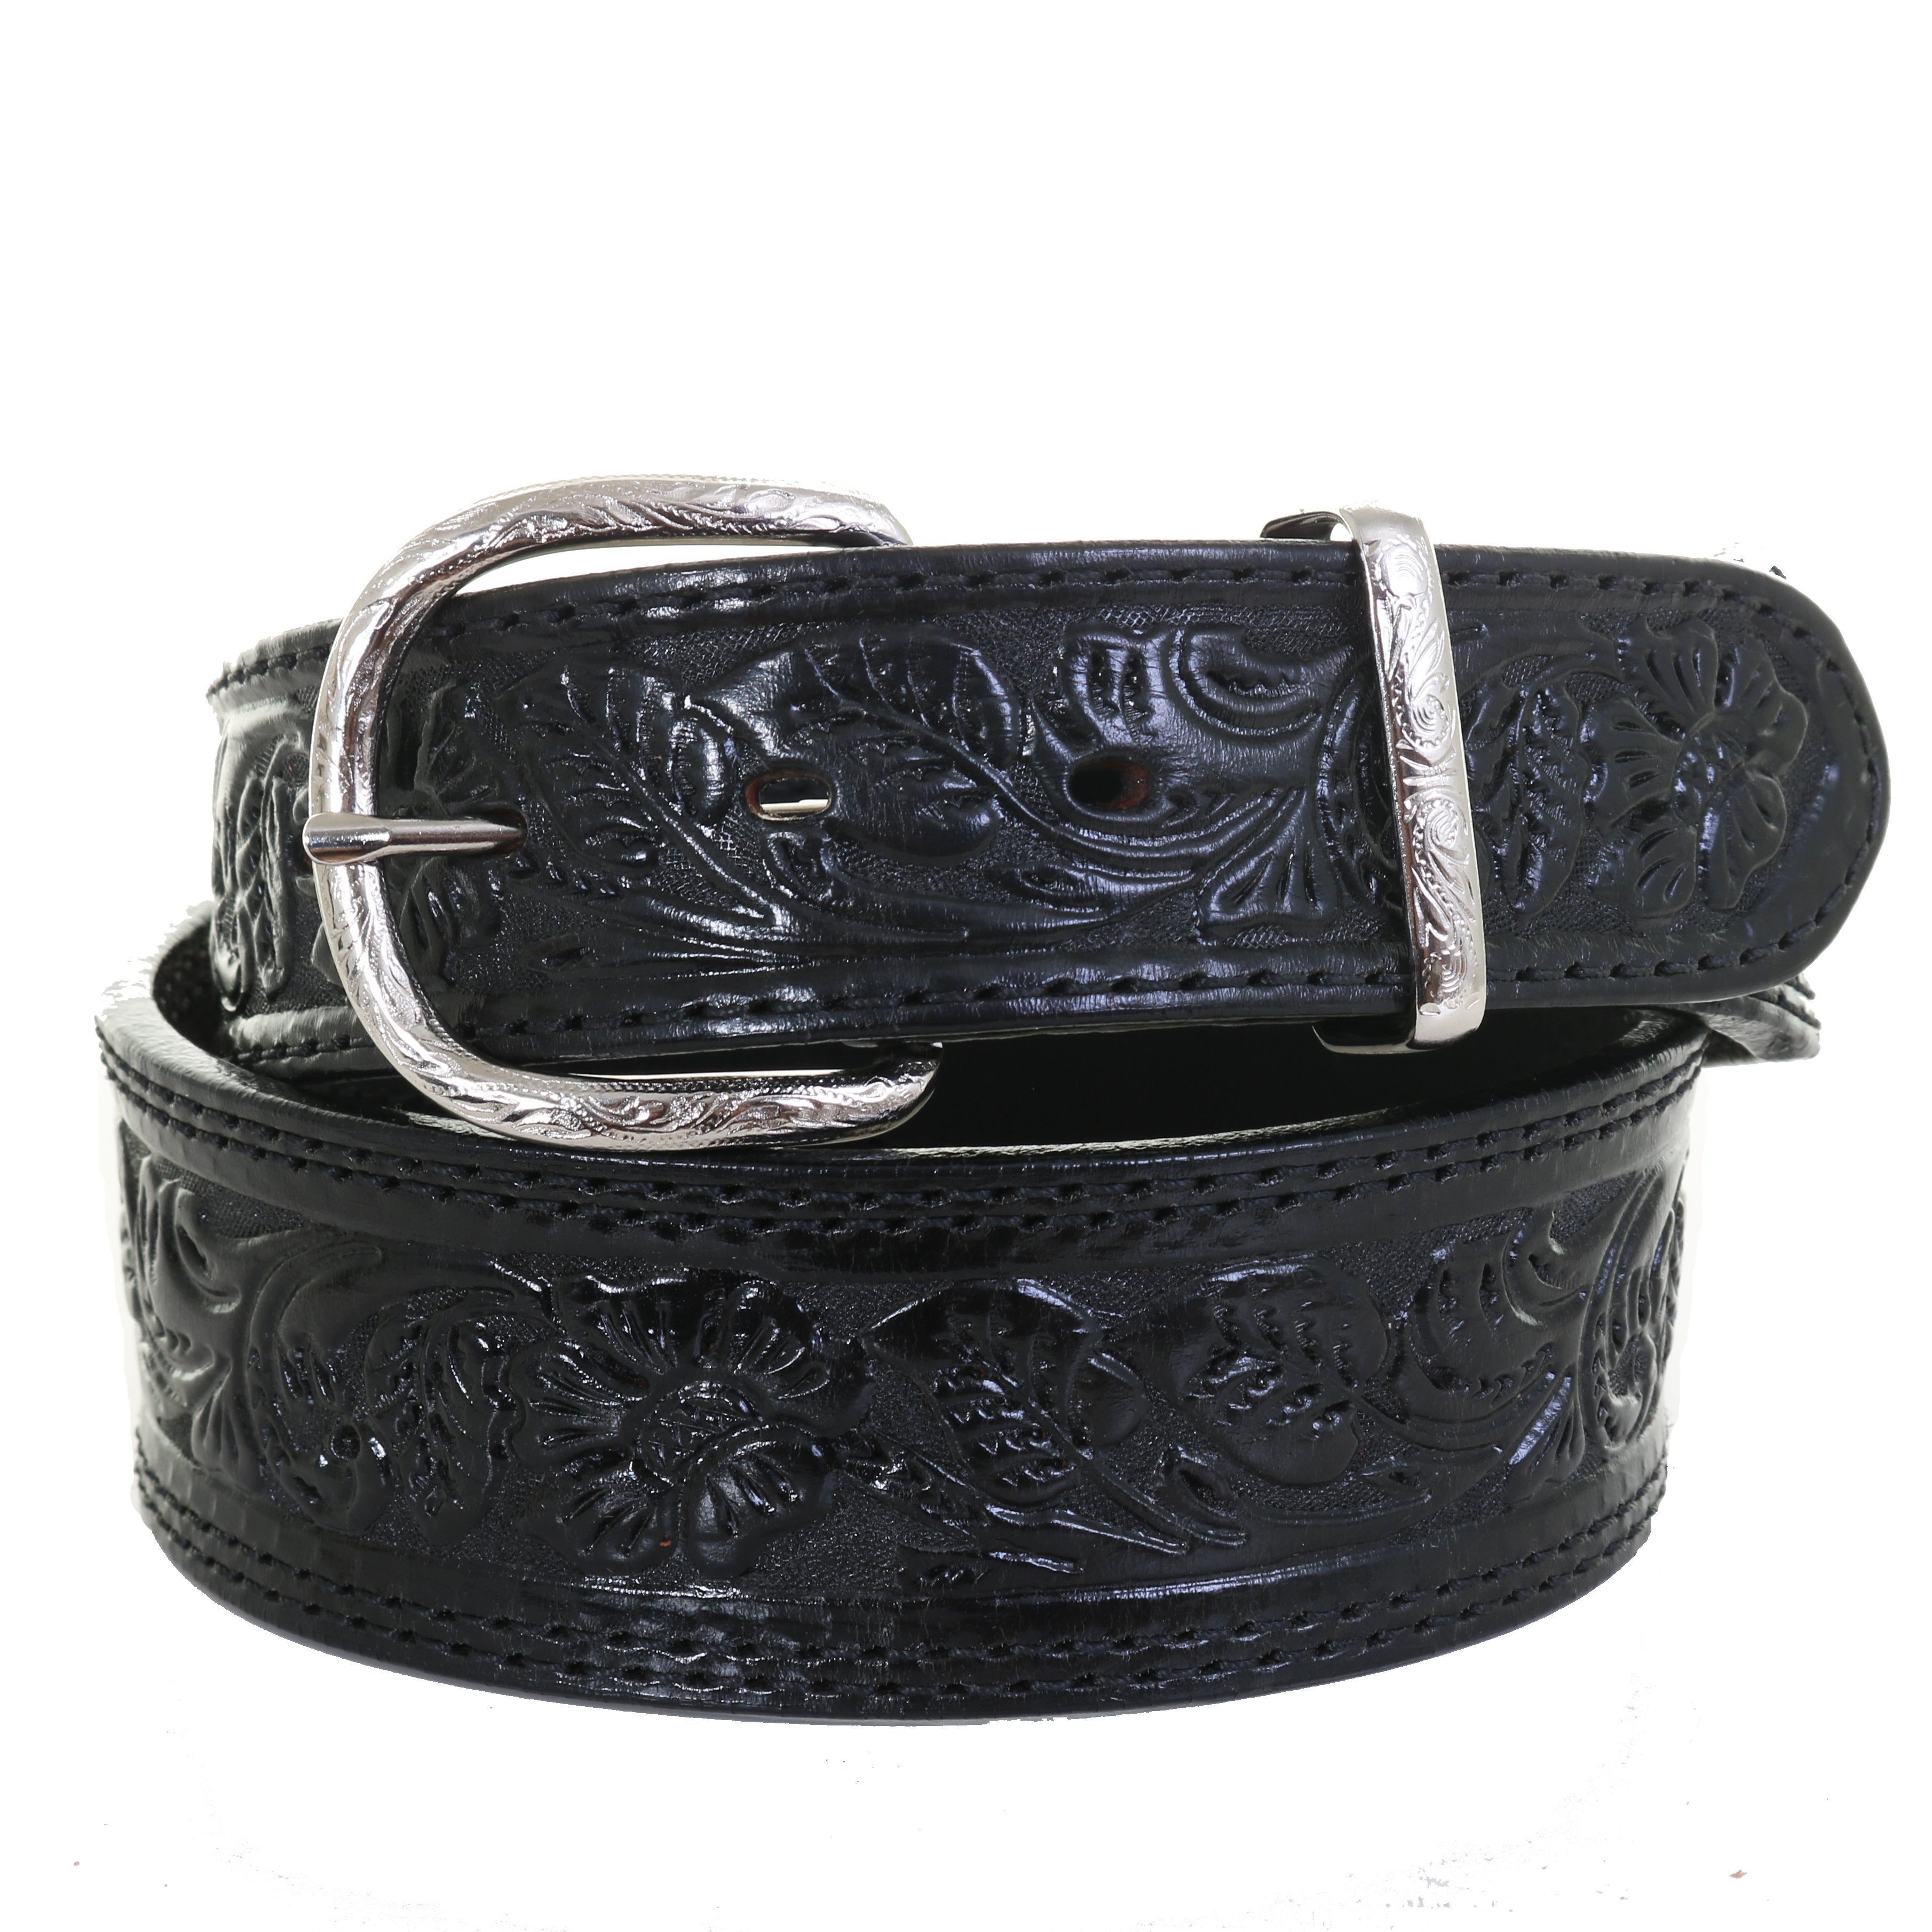 Mexican Flowers Leather Belt Black